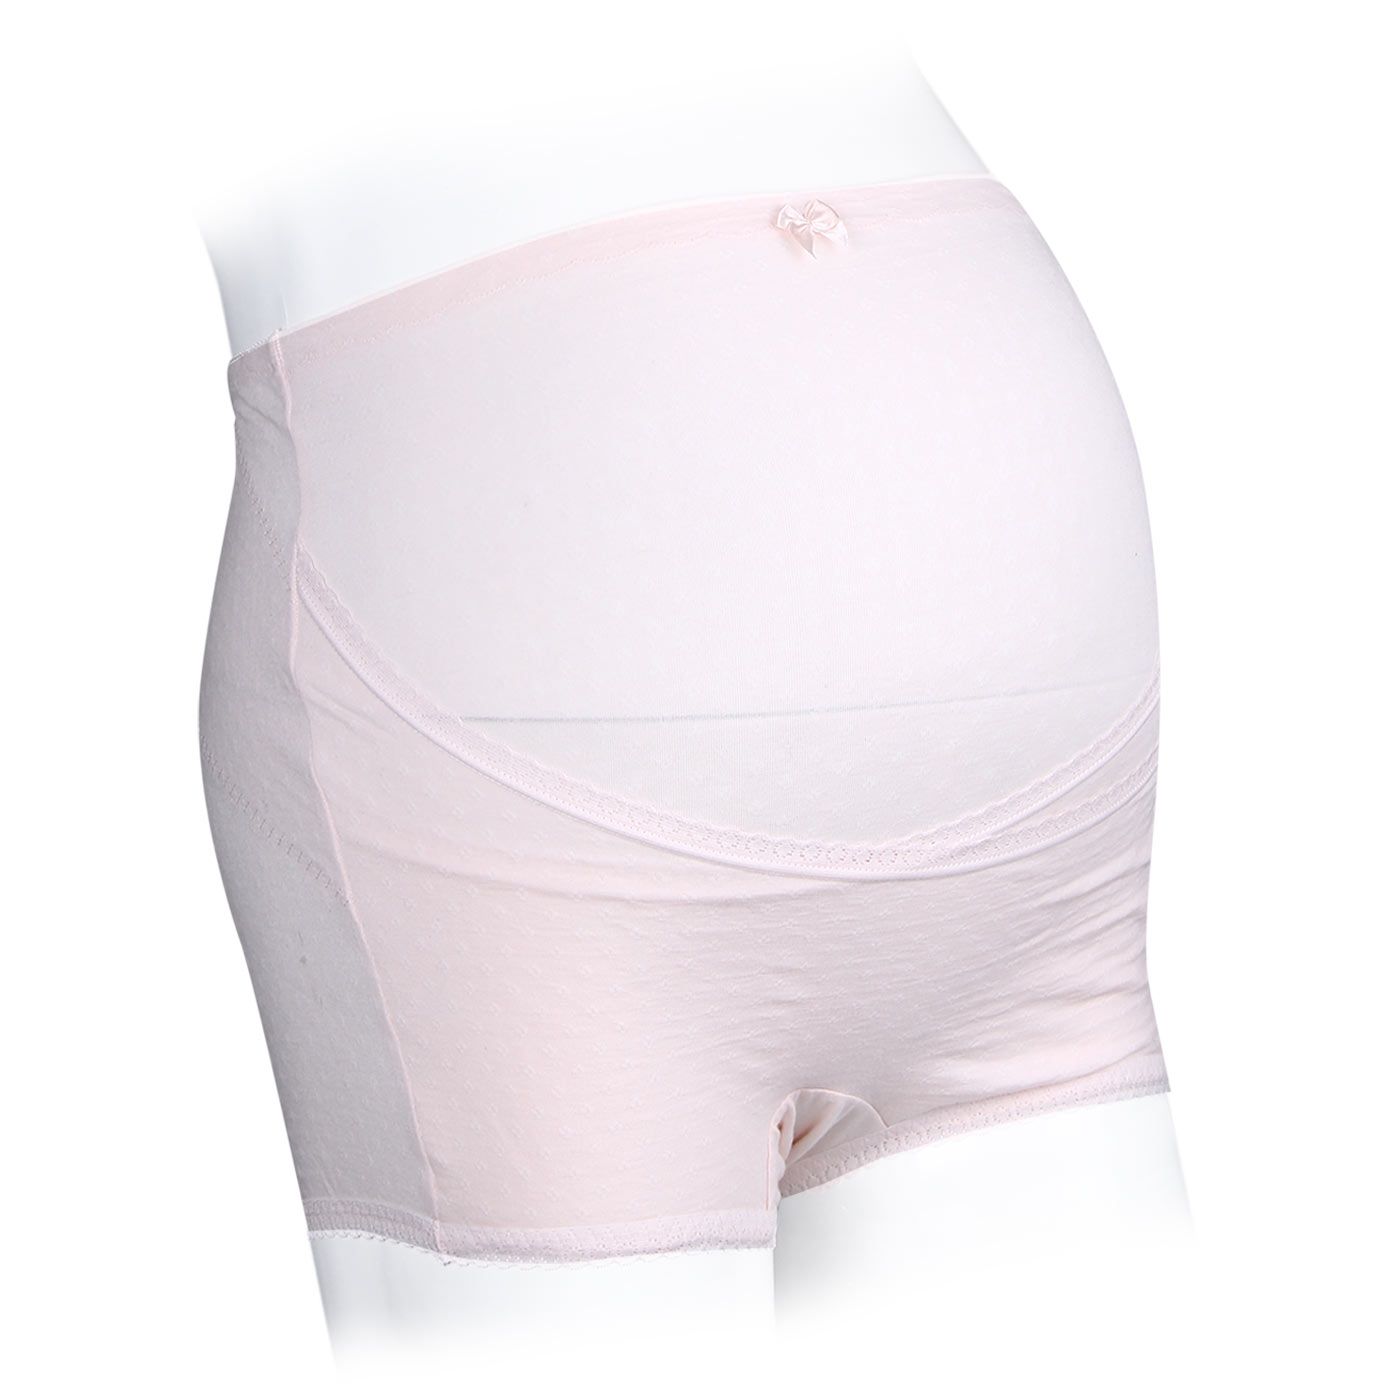 Rosemadame Pleasant Cooling Maternity Supporter Pink-M - 2